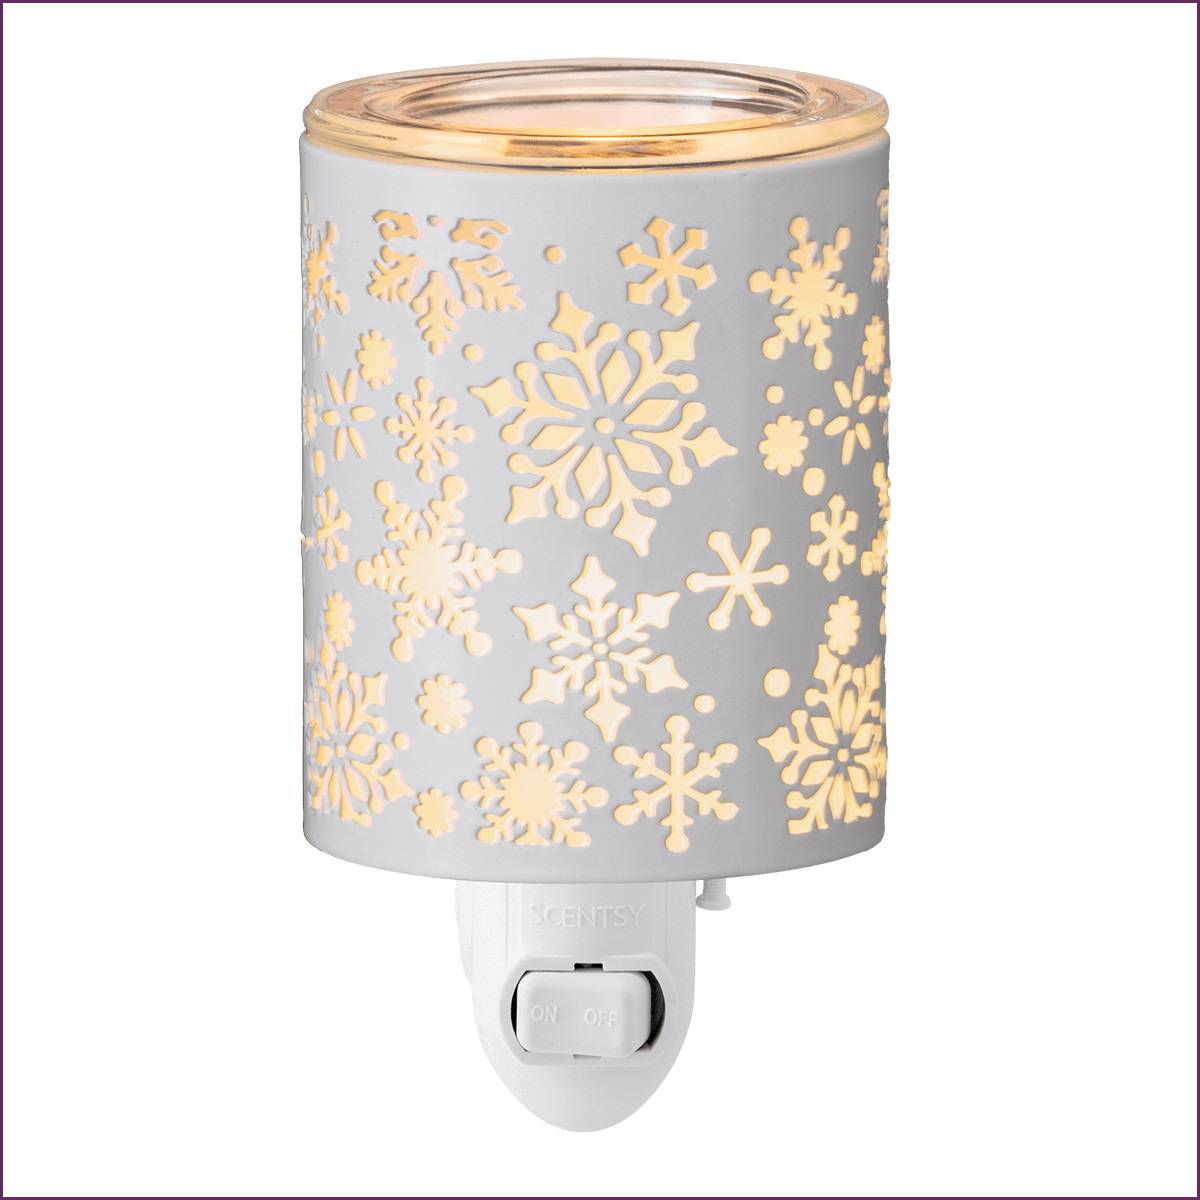 Catching Snowflakes Scentsy Mini Warmer | Stock On